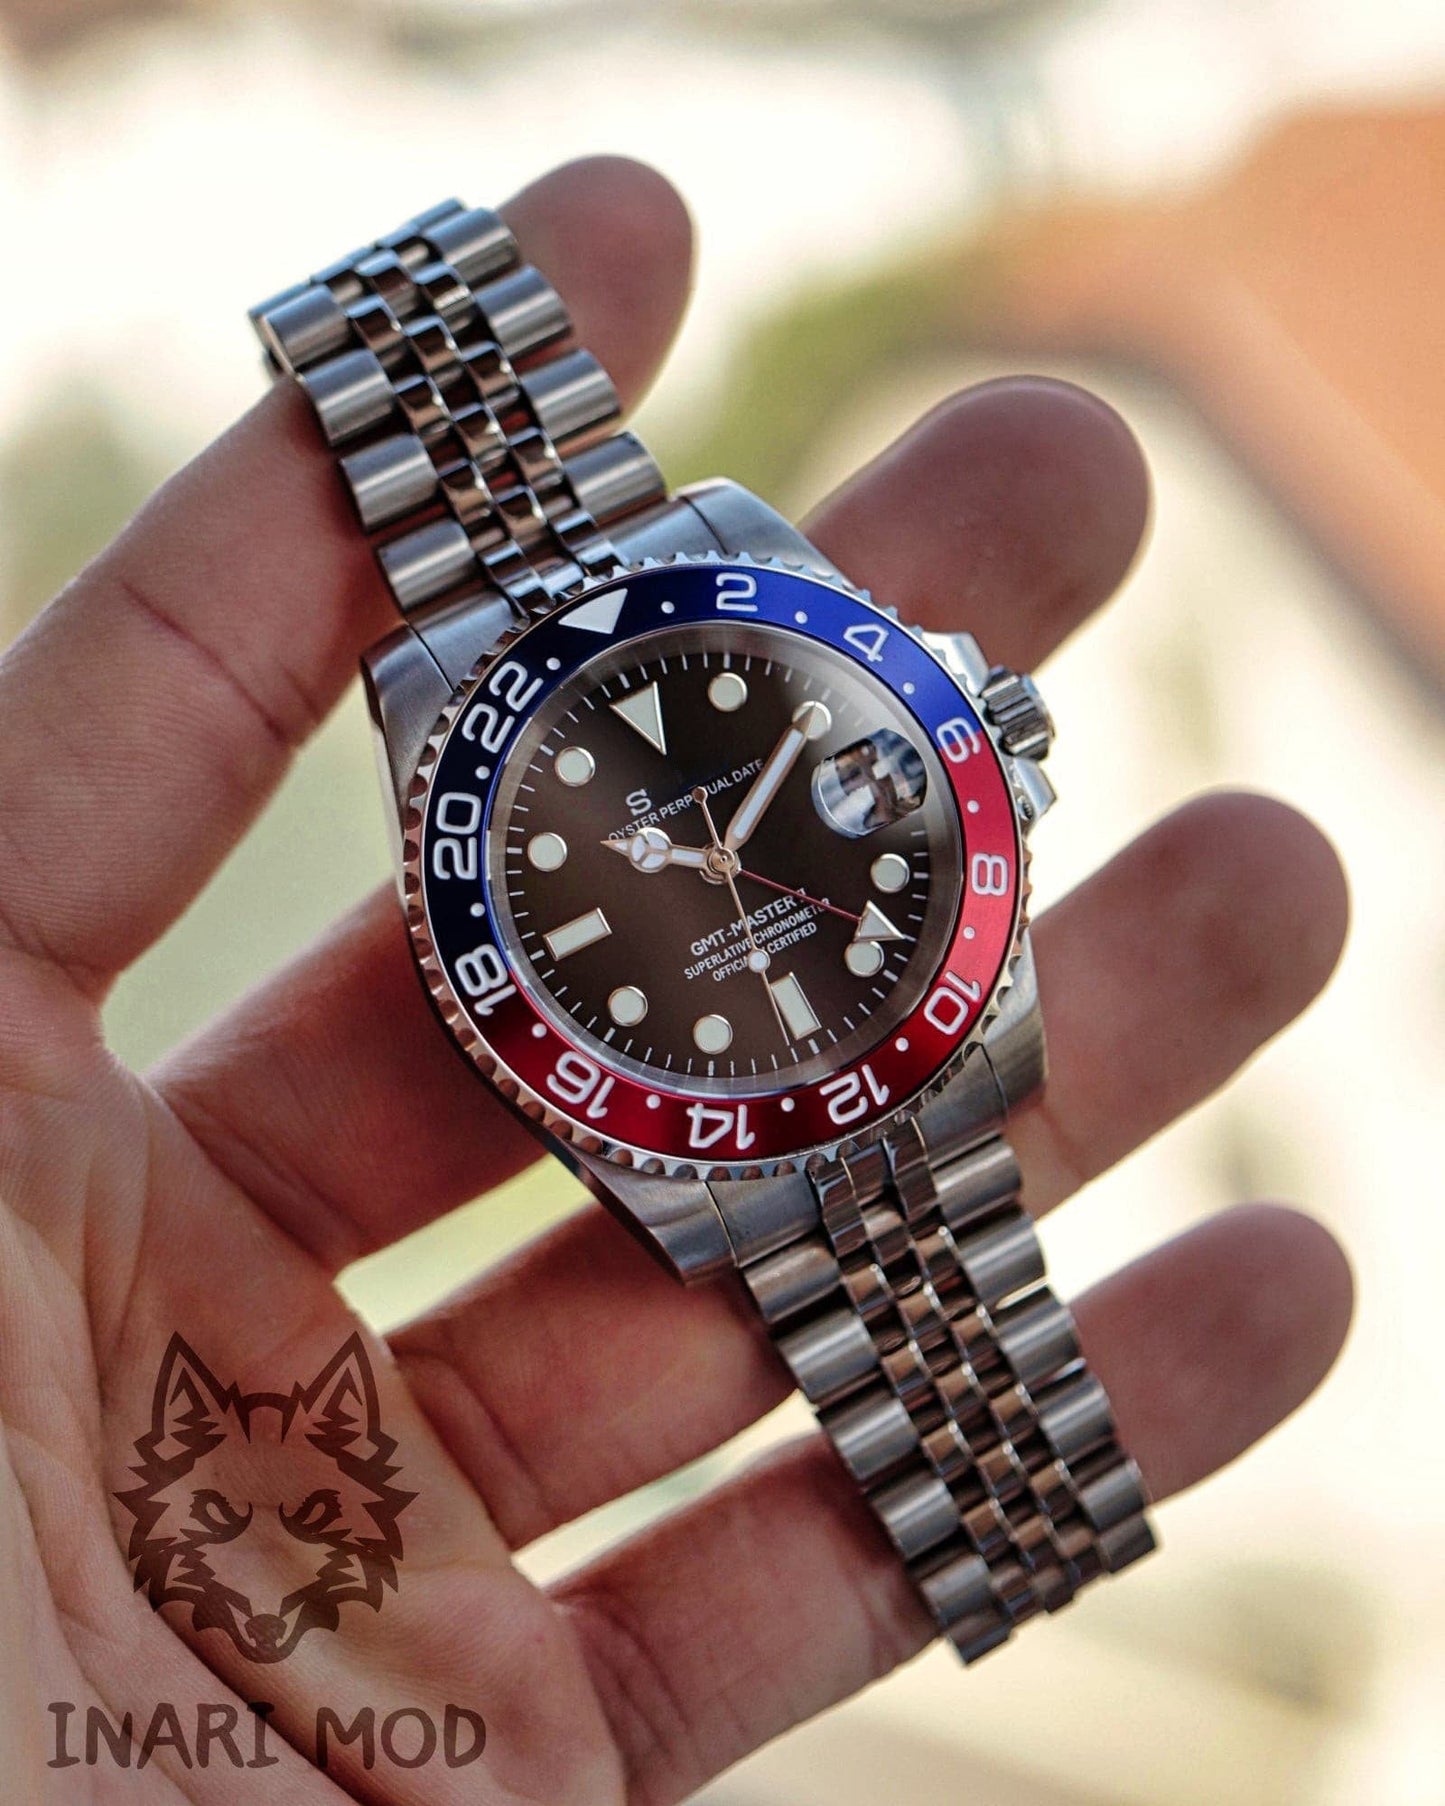 Seiko Mod Pepsi GMT from Inarimod for 359.90